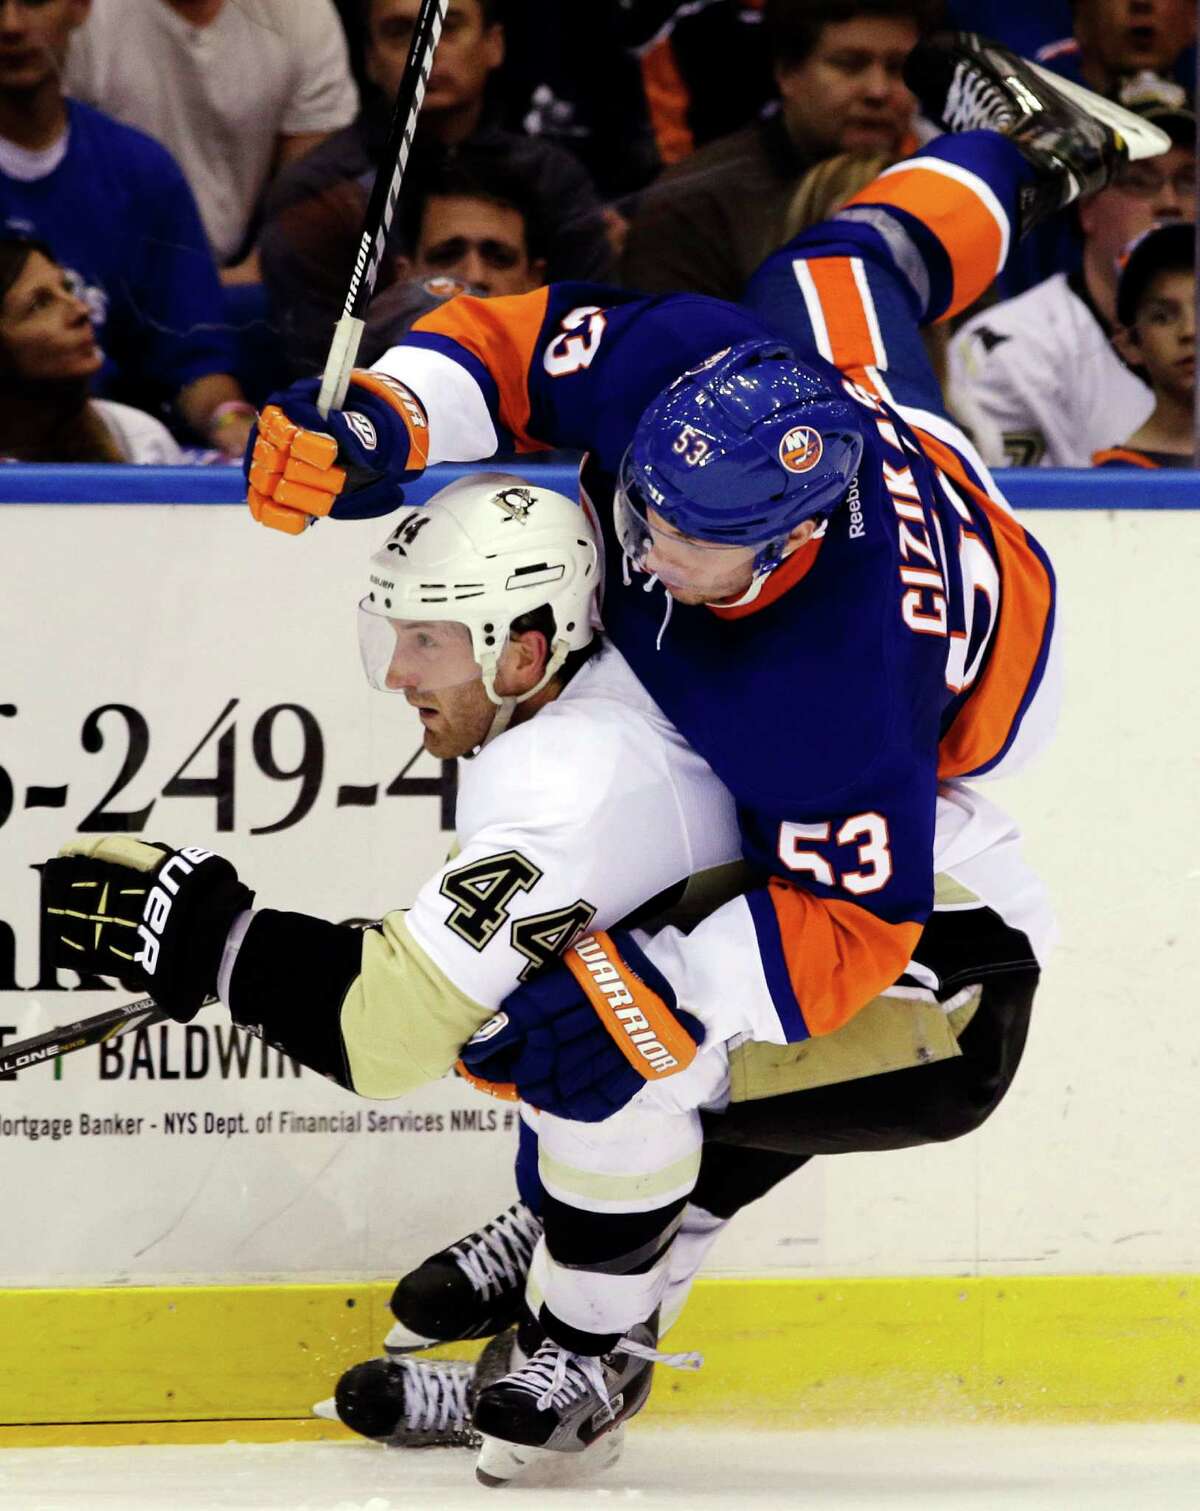 The Penguins and Islanders played a thriller that also included a spill of Casey Cizikas by Brooks Orpik.